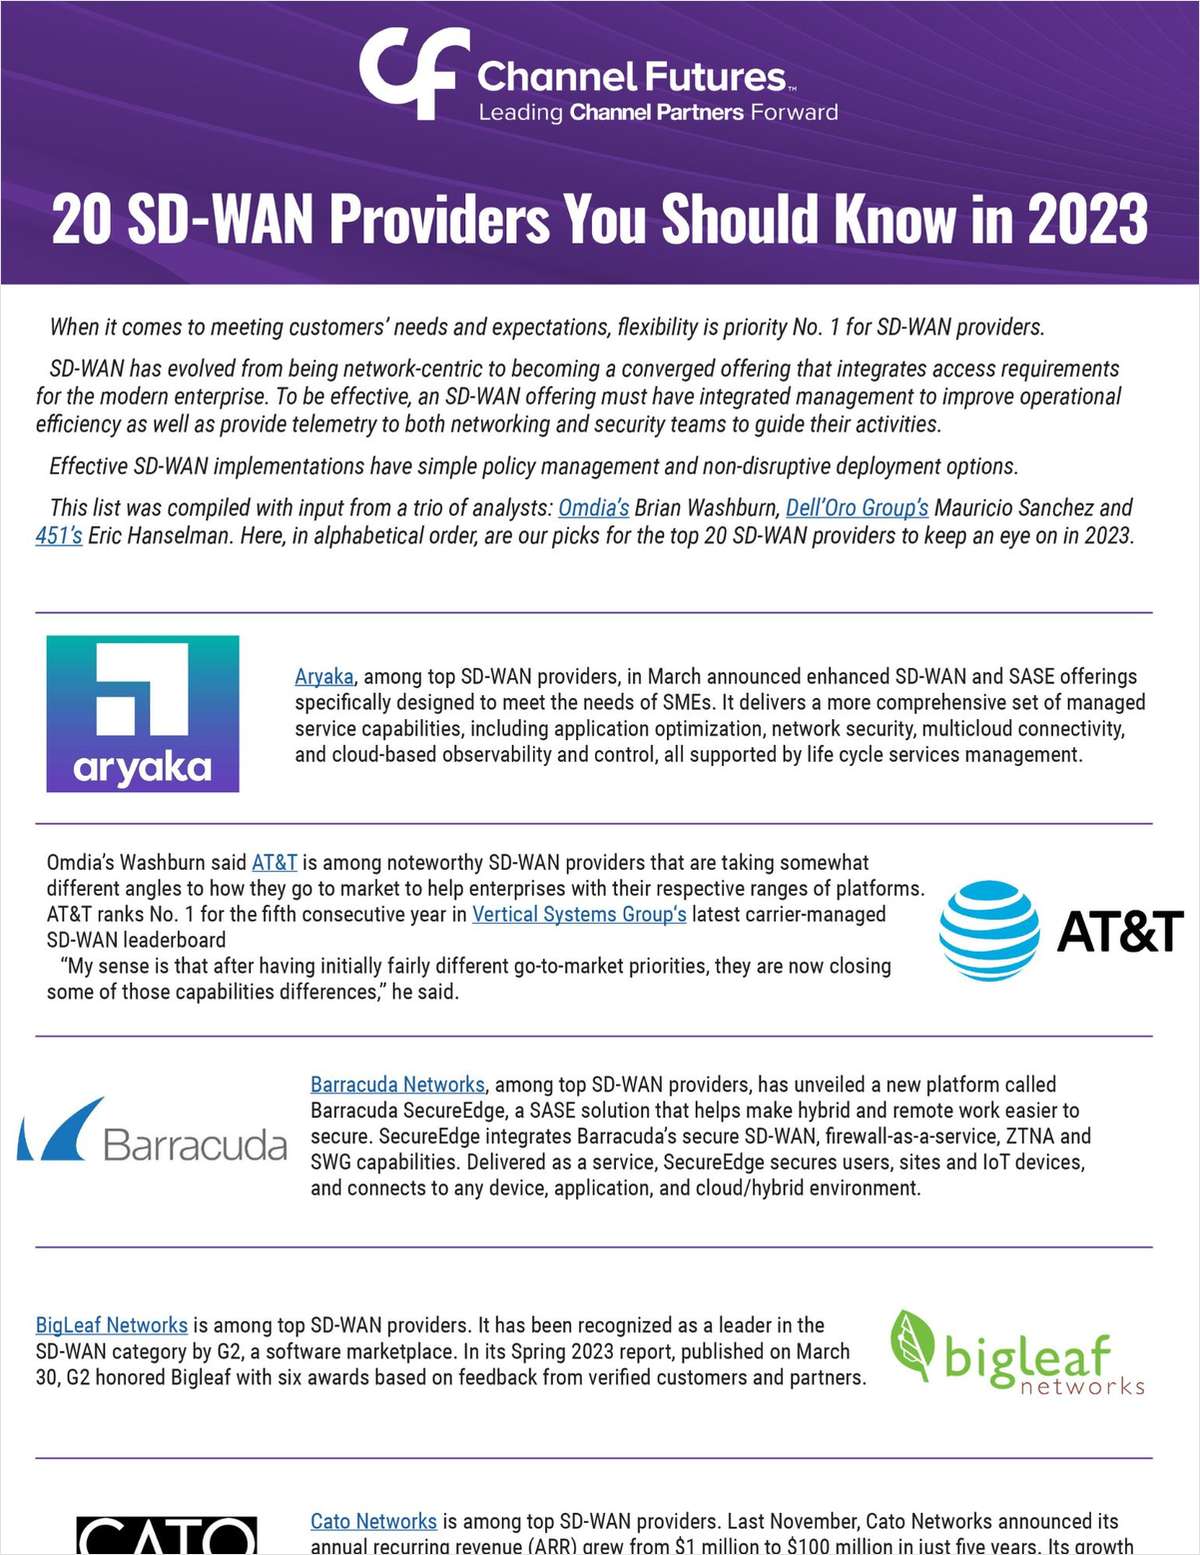 20 SD-WAN Providers You Should Know in 2023